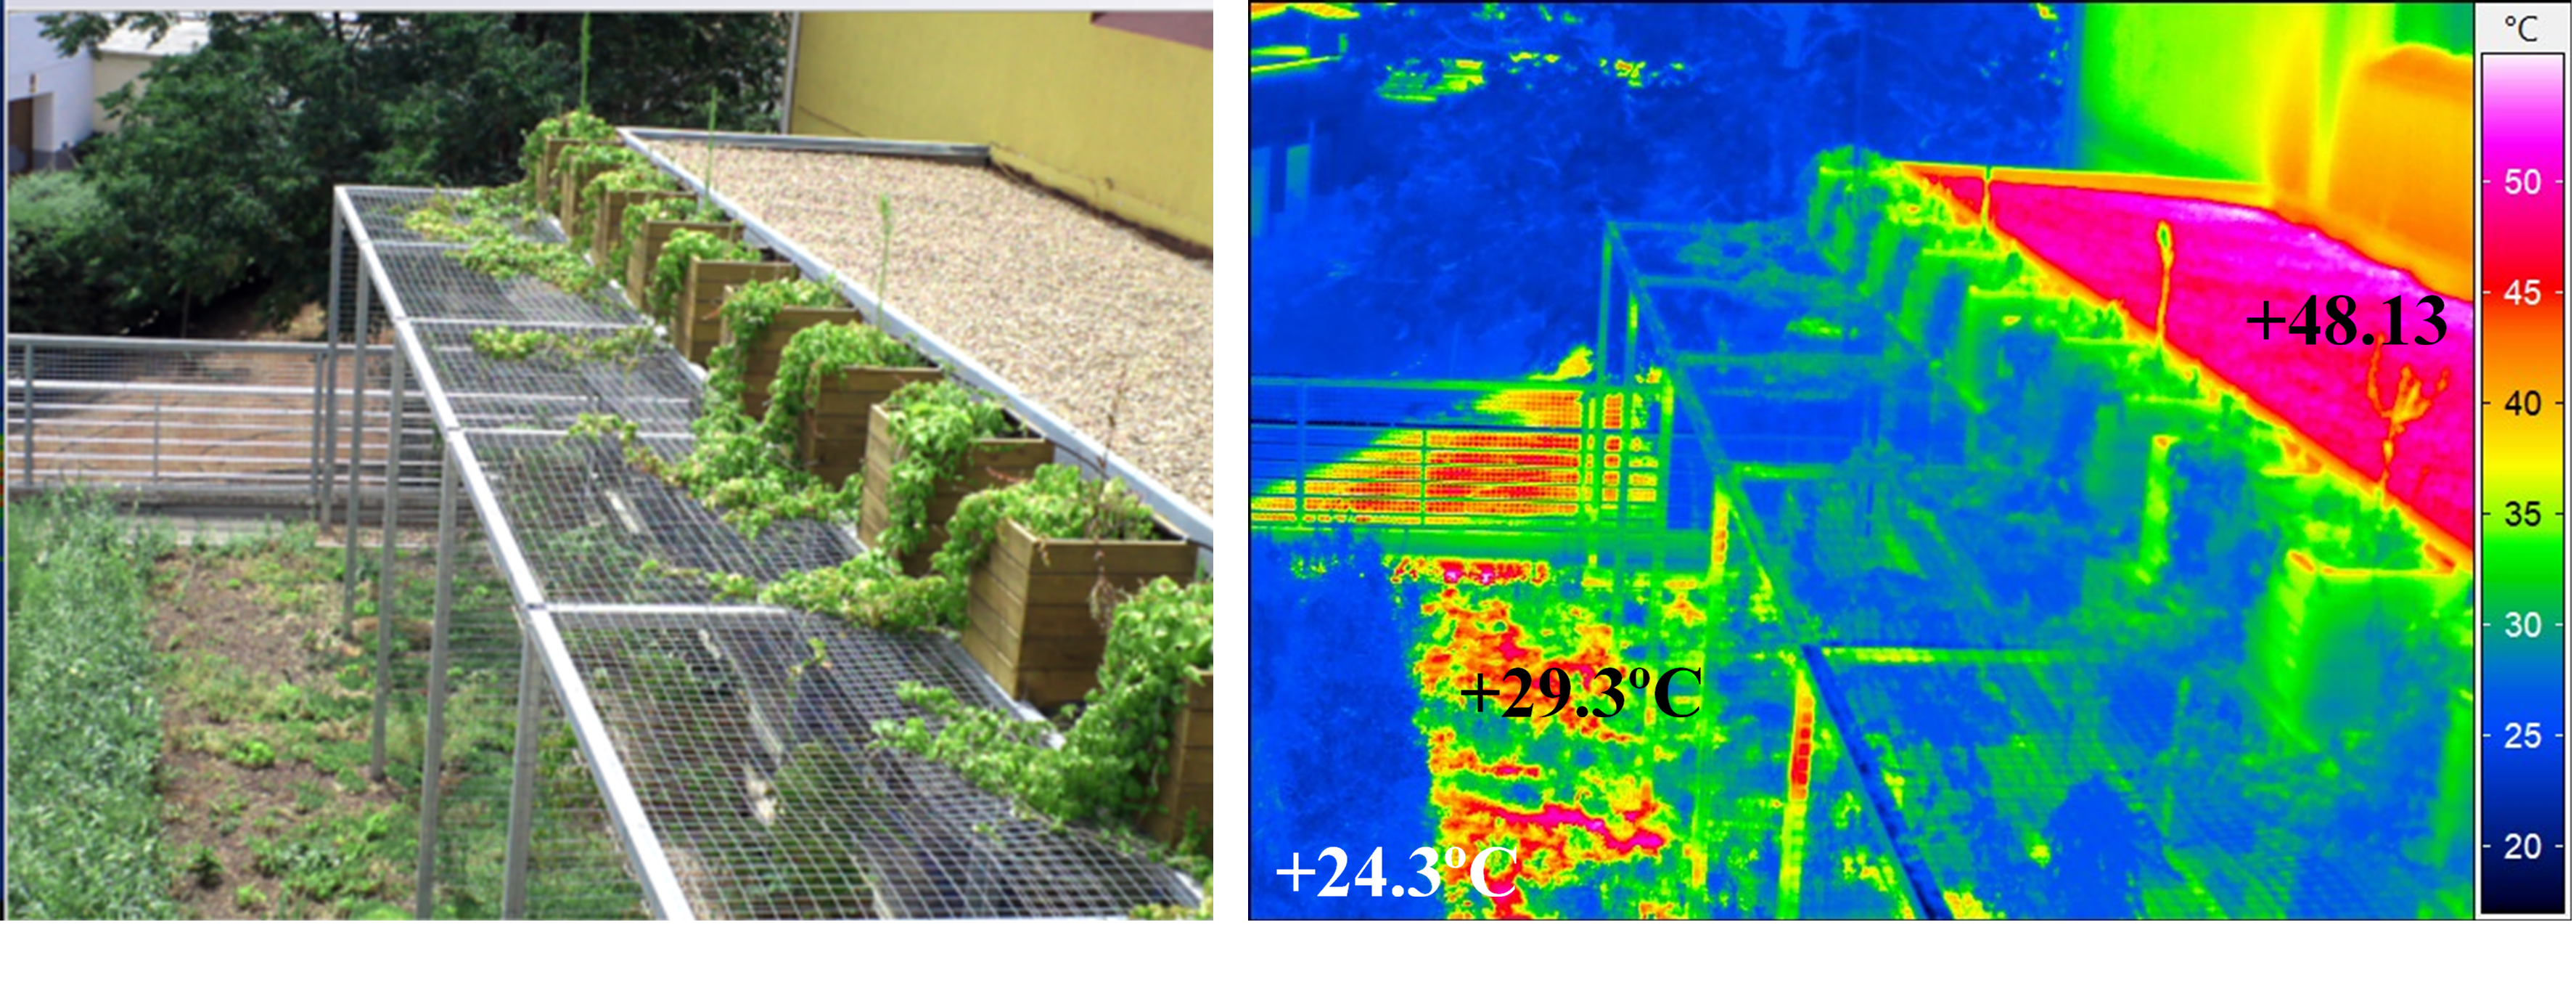 Temperature monitoring of green roofs